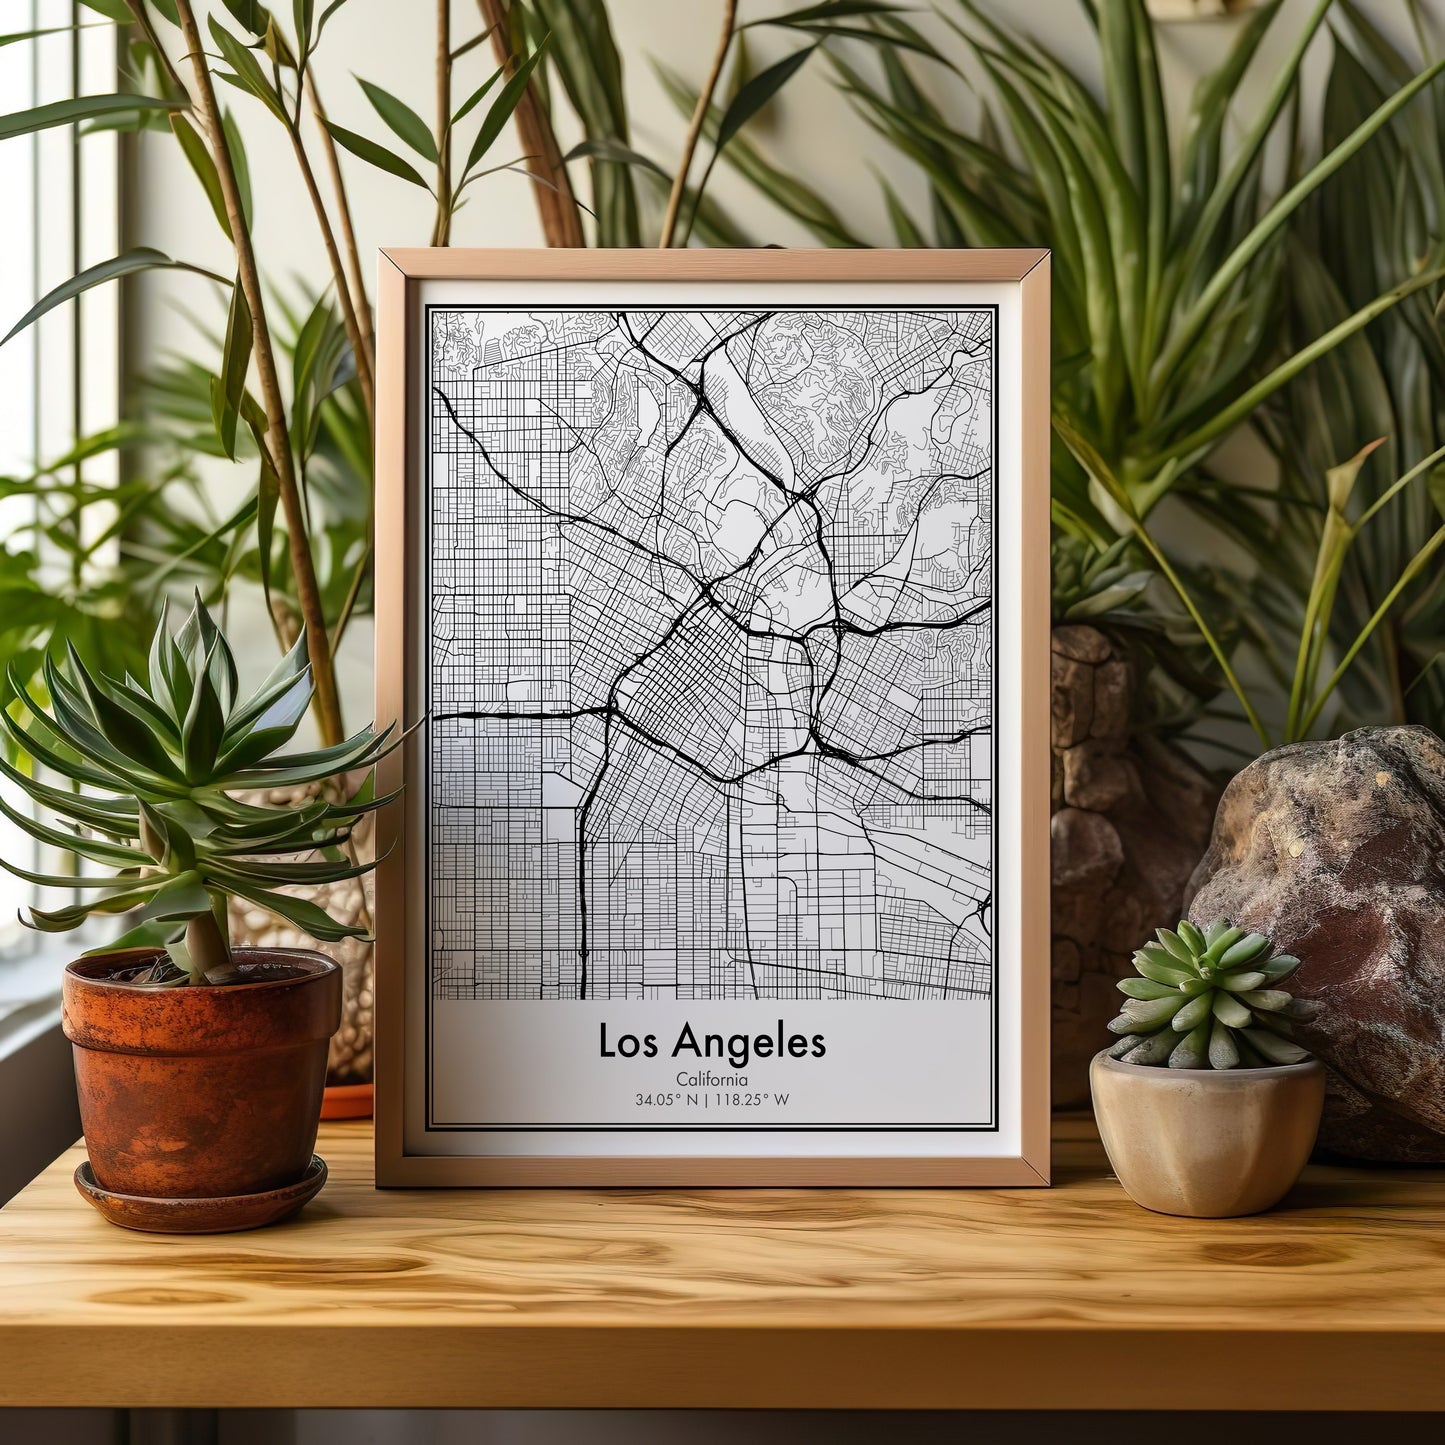 Los Angeles Poster -  Wall Decor Map of City Road Network